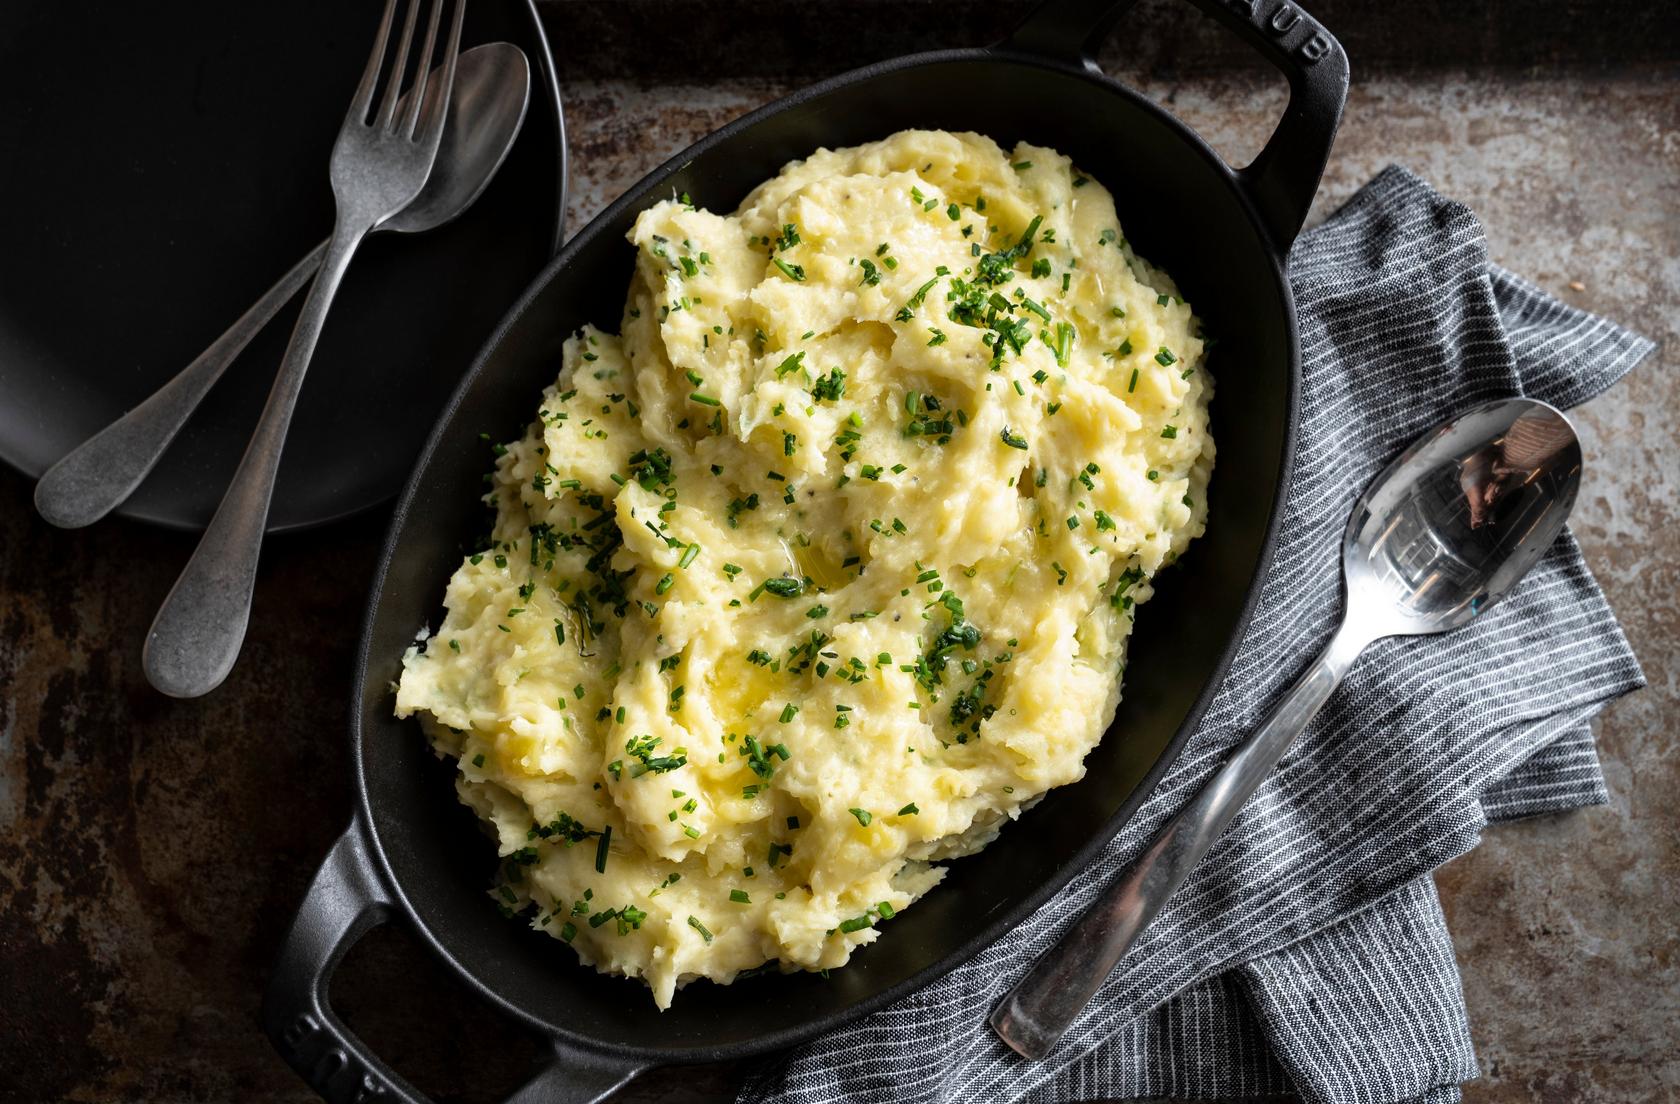 Staples_Mashed-Potatoes_001